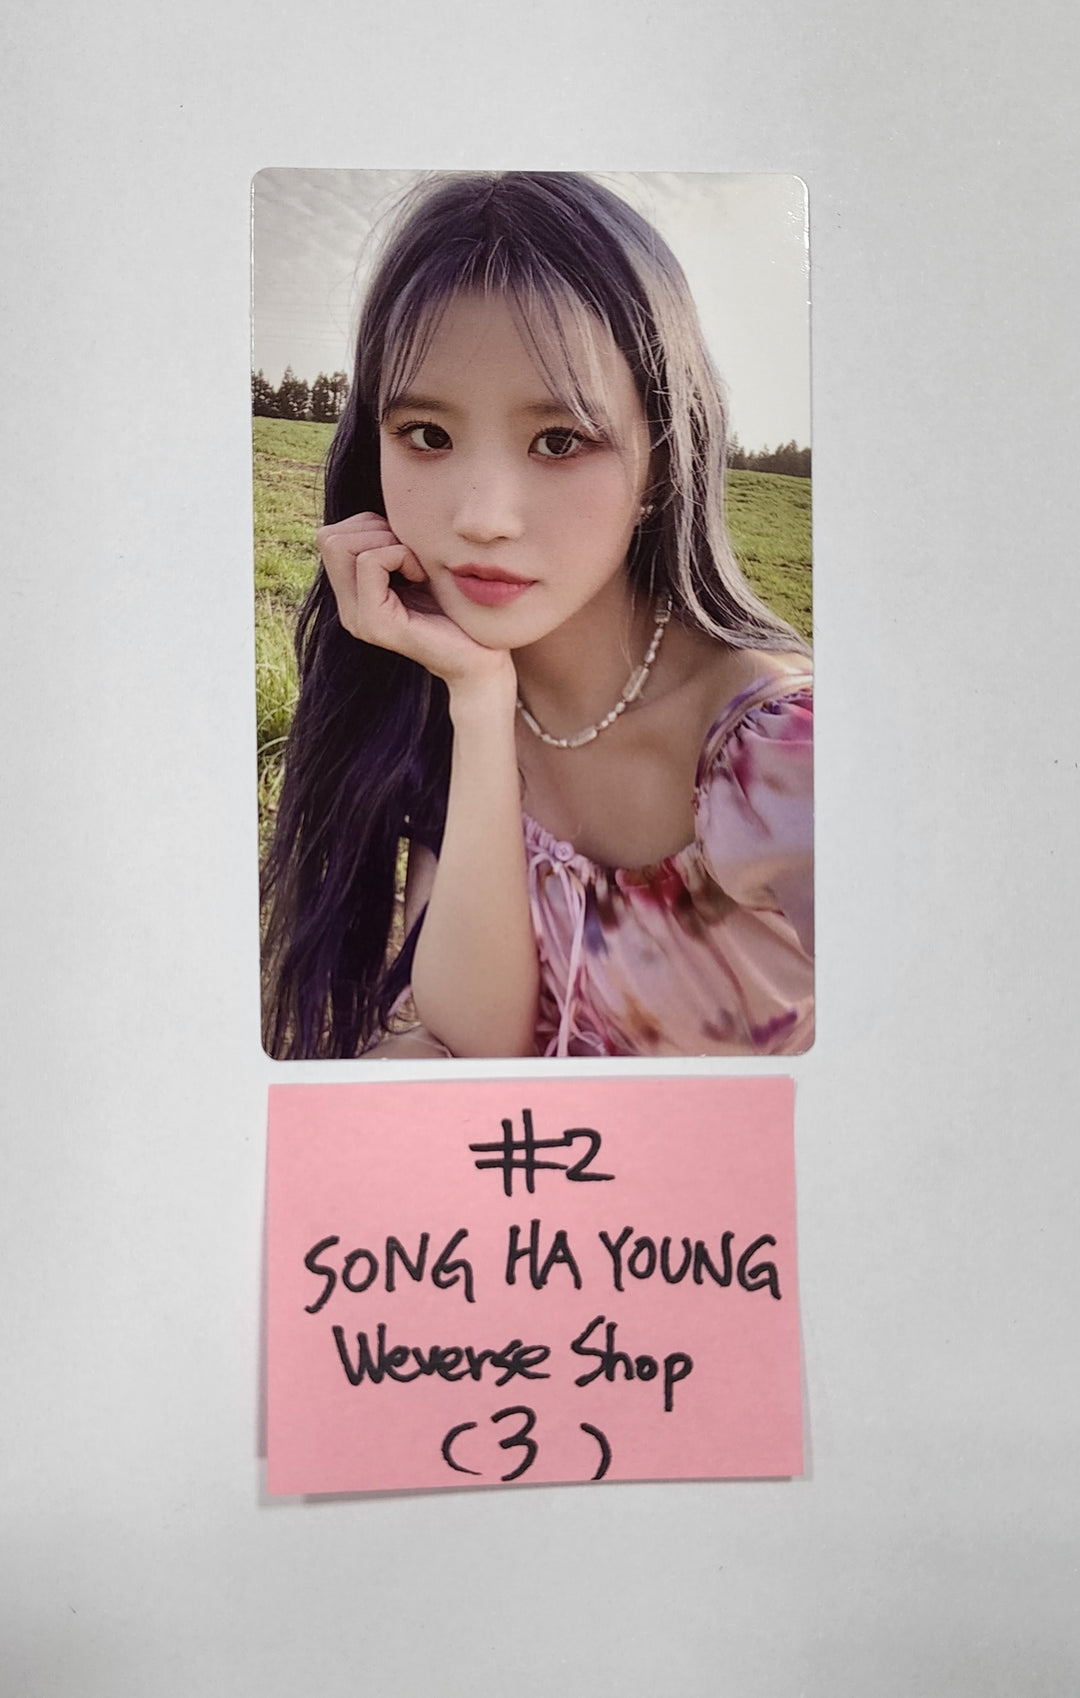 Fromis_9 "from our Memento Box" - Weverse Shop Pre-Order Benefit Photocard